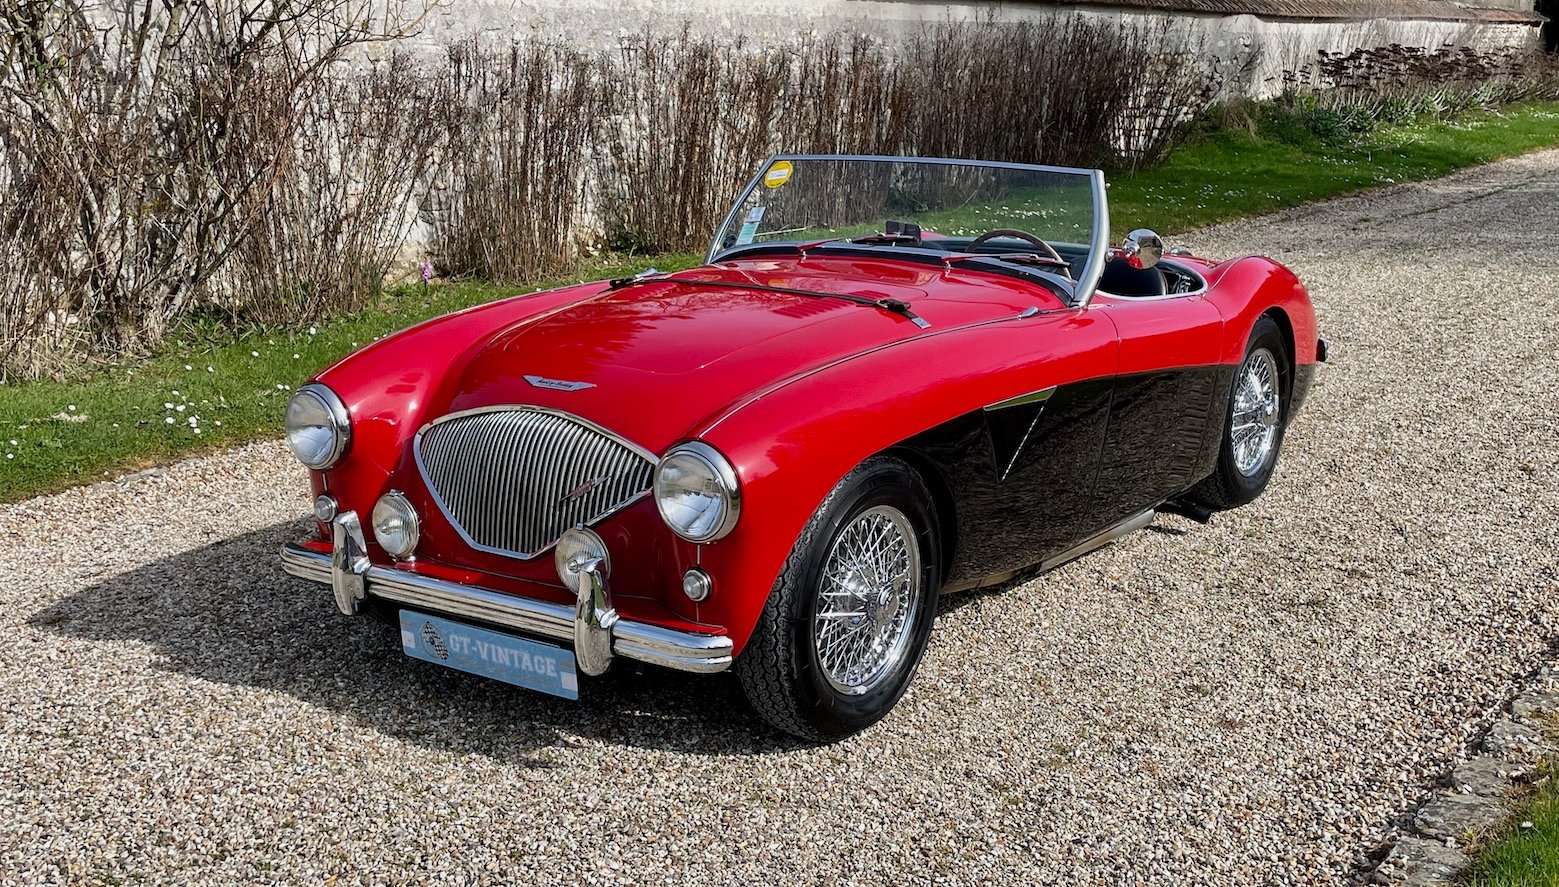 Austin-Healey 100 Convertible in Red used in MARCQ for € 89,000.-